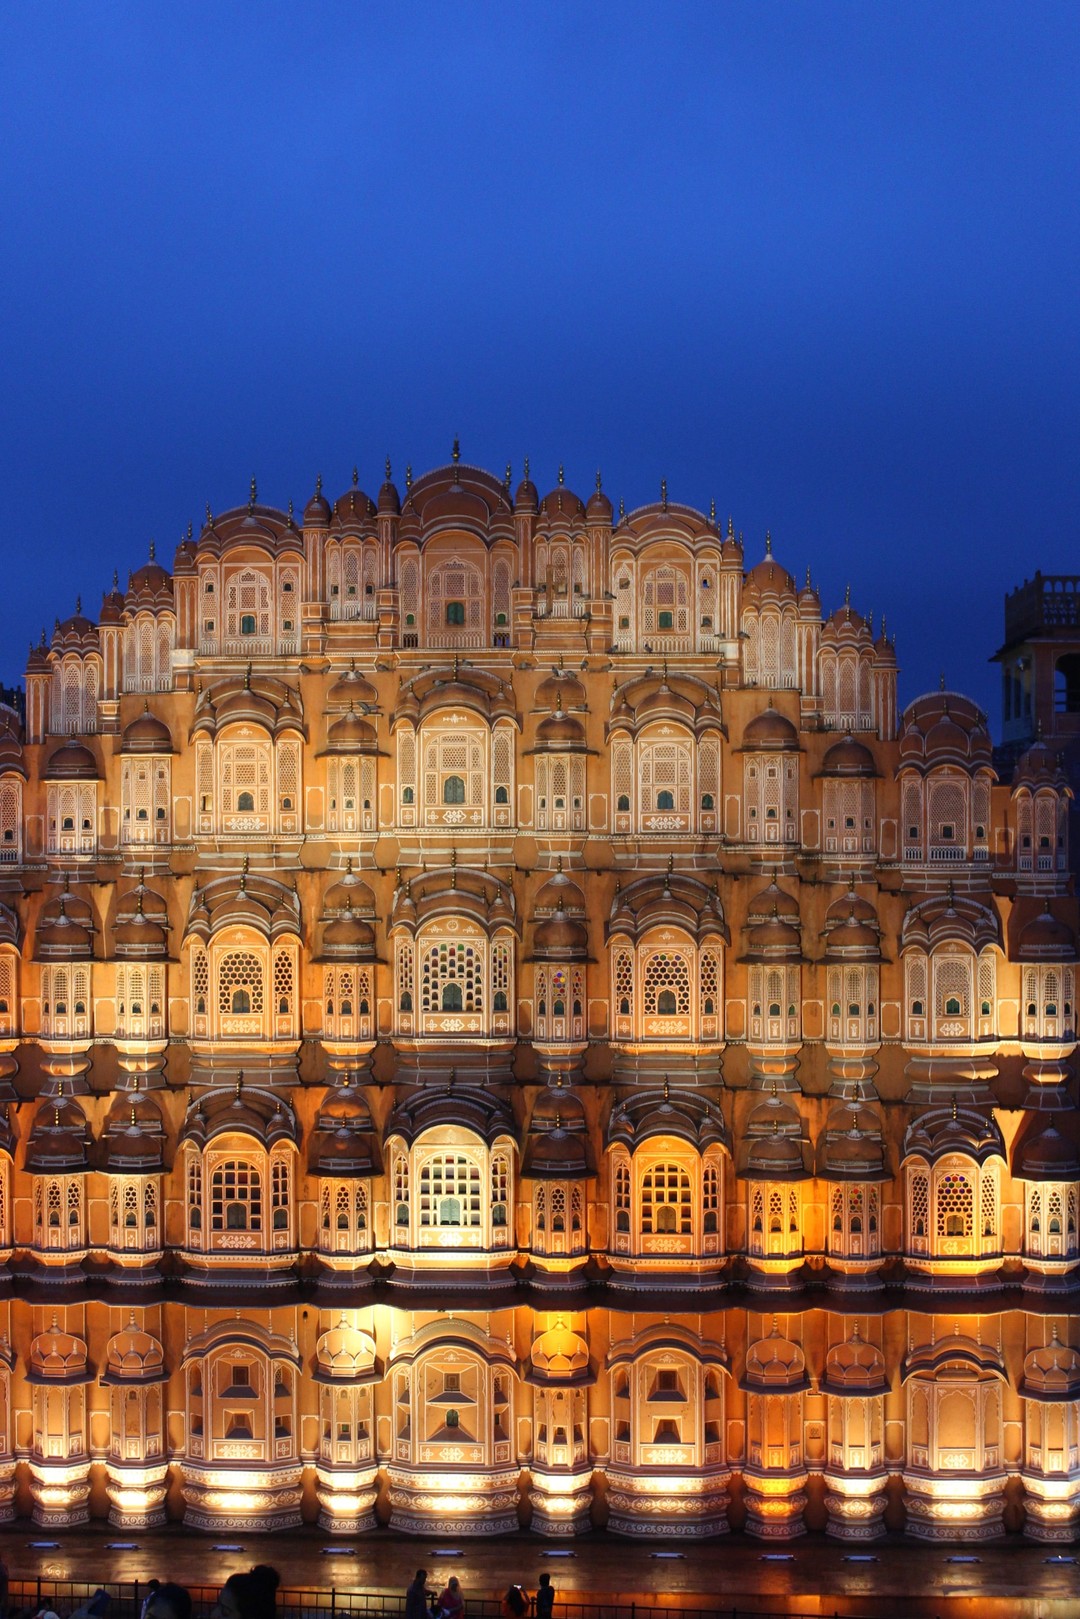 Hawa Mahal, Jaipur, India: One of the best romantic getaways for couples who love culture.